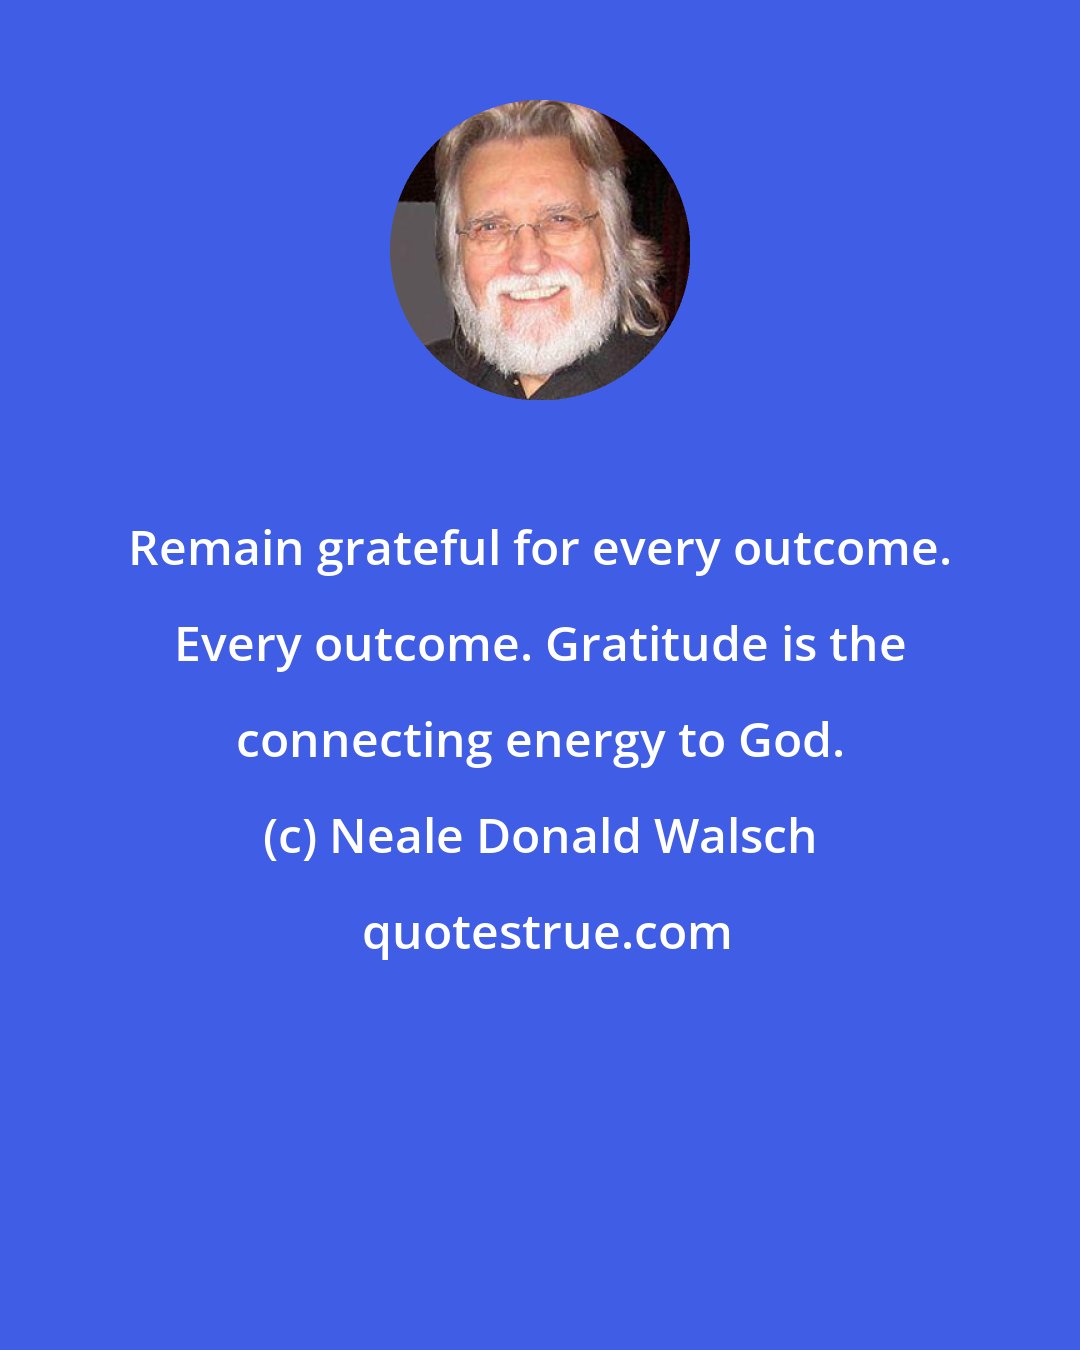 Neale Donald Walsch: Remain grateful for every outcome. Every outcome. Gratitude is the connecting energy to God.